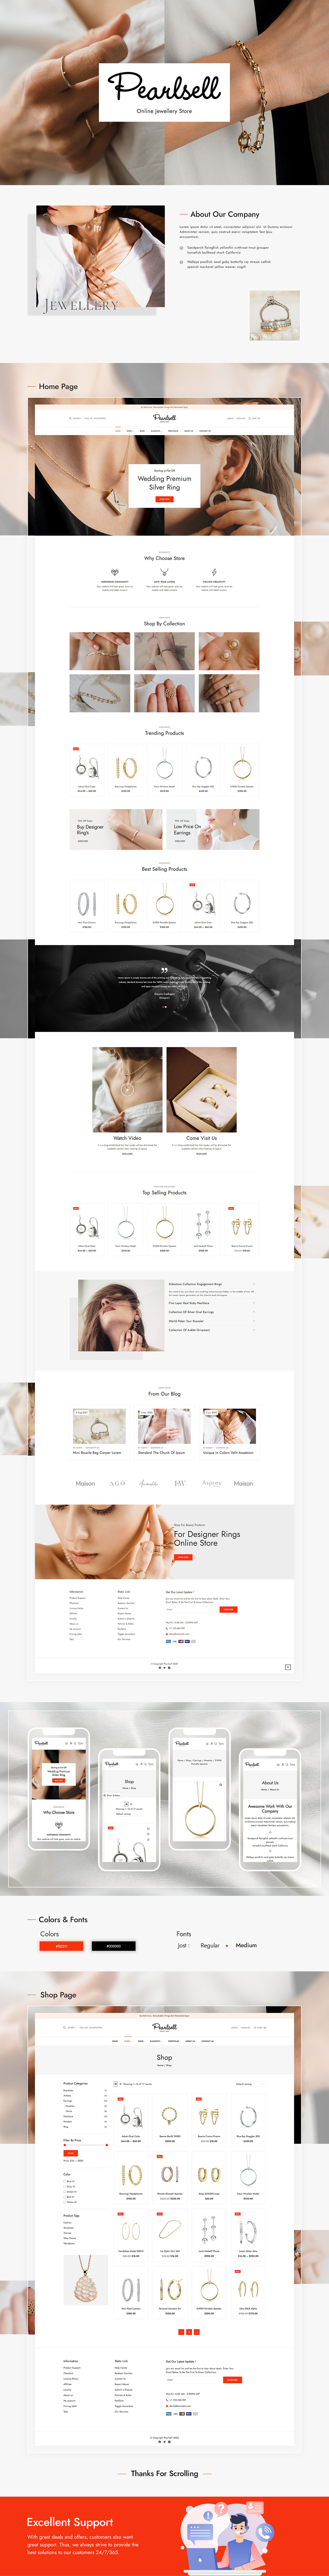 Pearlsell - Jewelry WooCommerce Theme